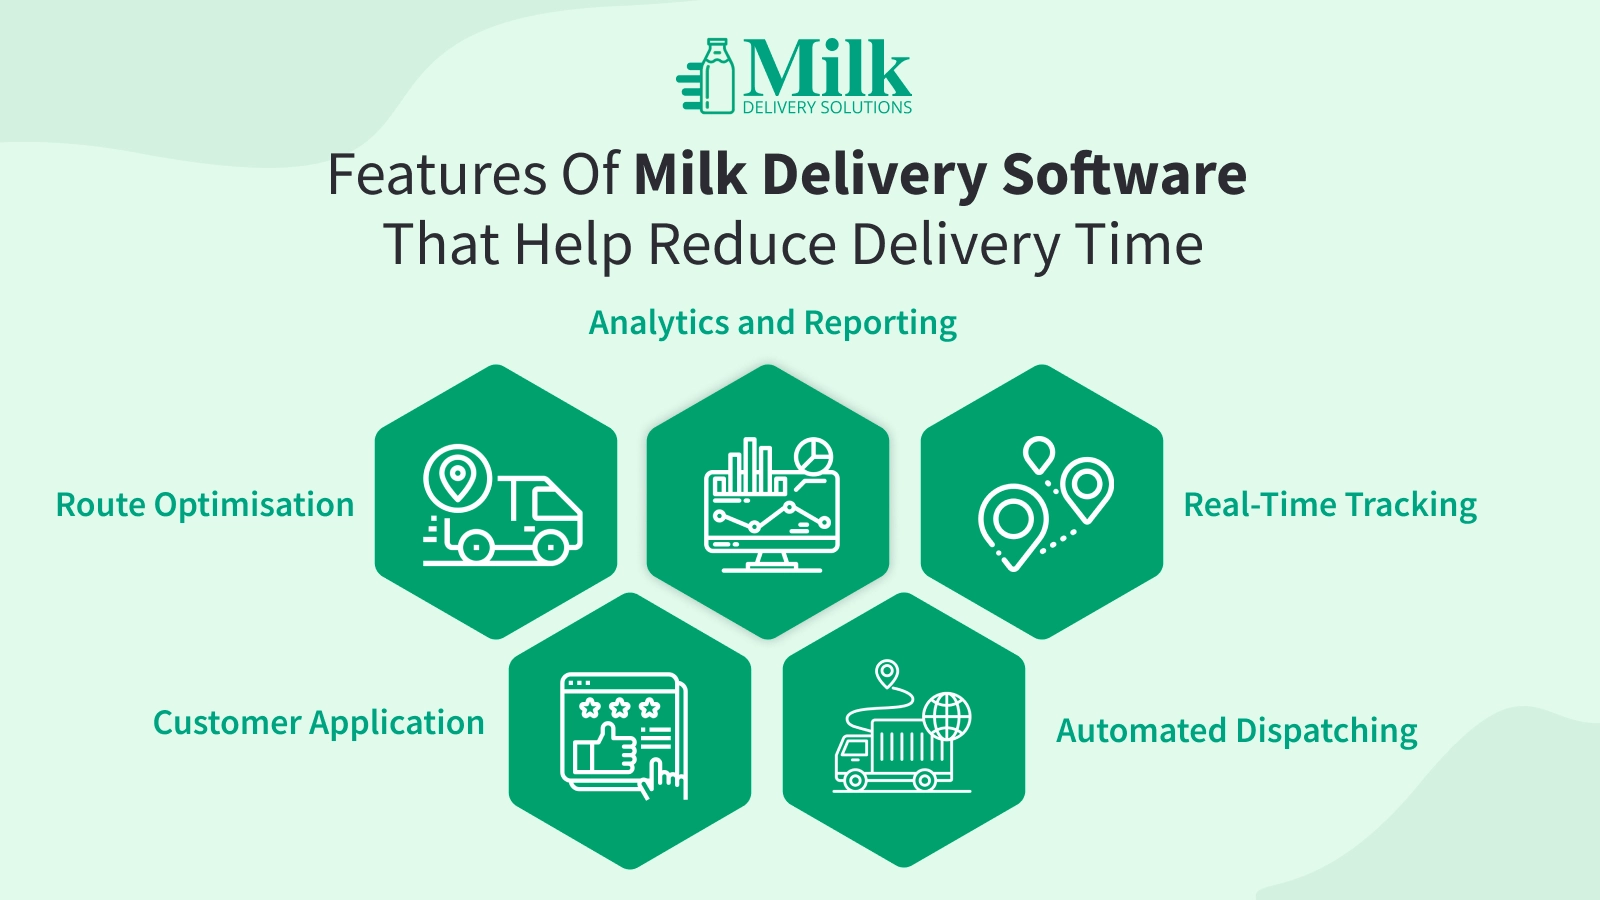 ravi garg, mds, features, milk delivery software, reduce delivery time, delivery time, route optimisation, real-time tracking, automated dispatching, customer application, analytics and reporting